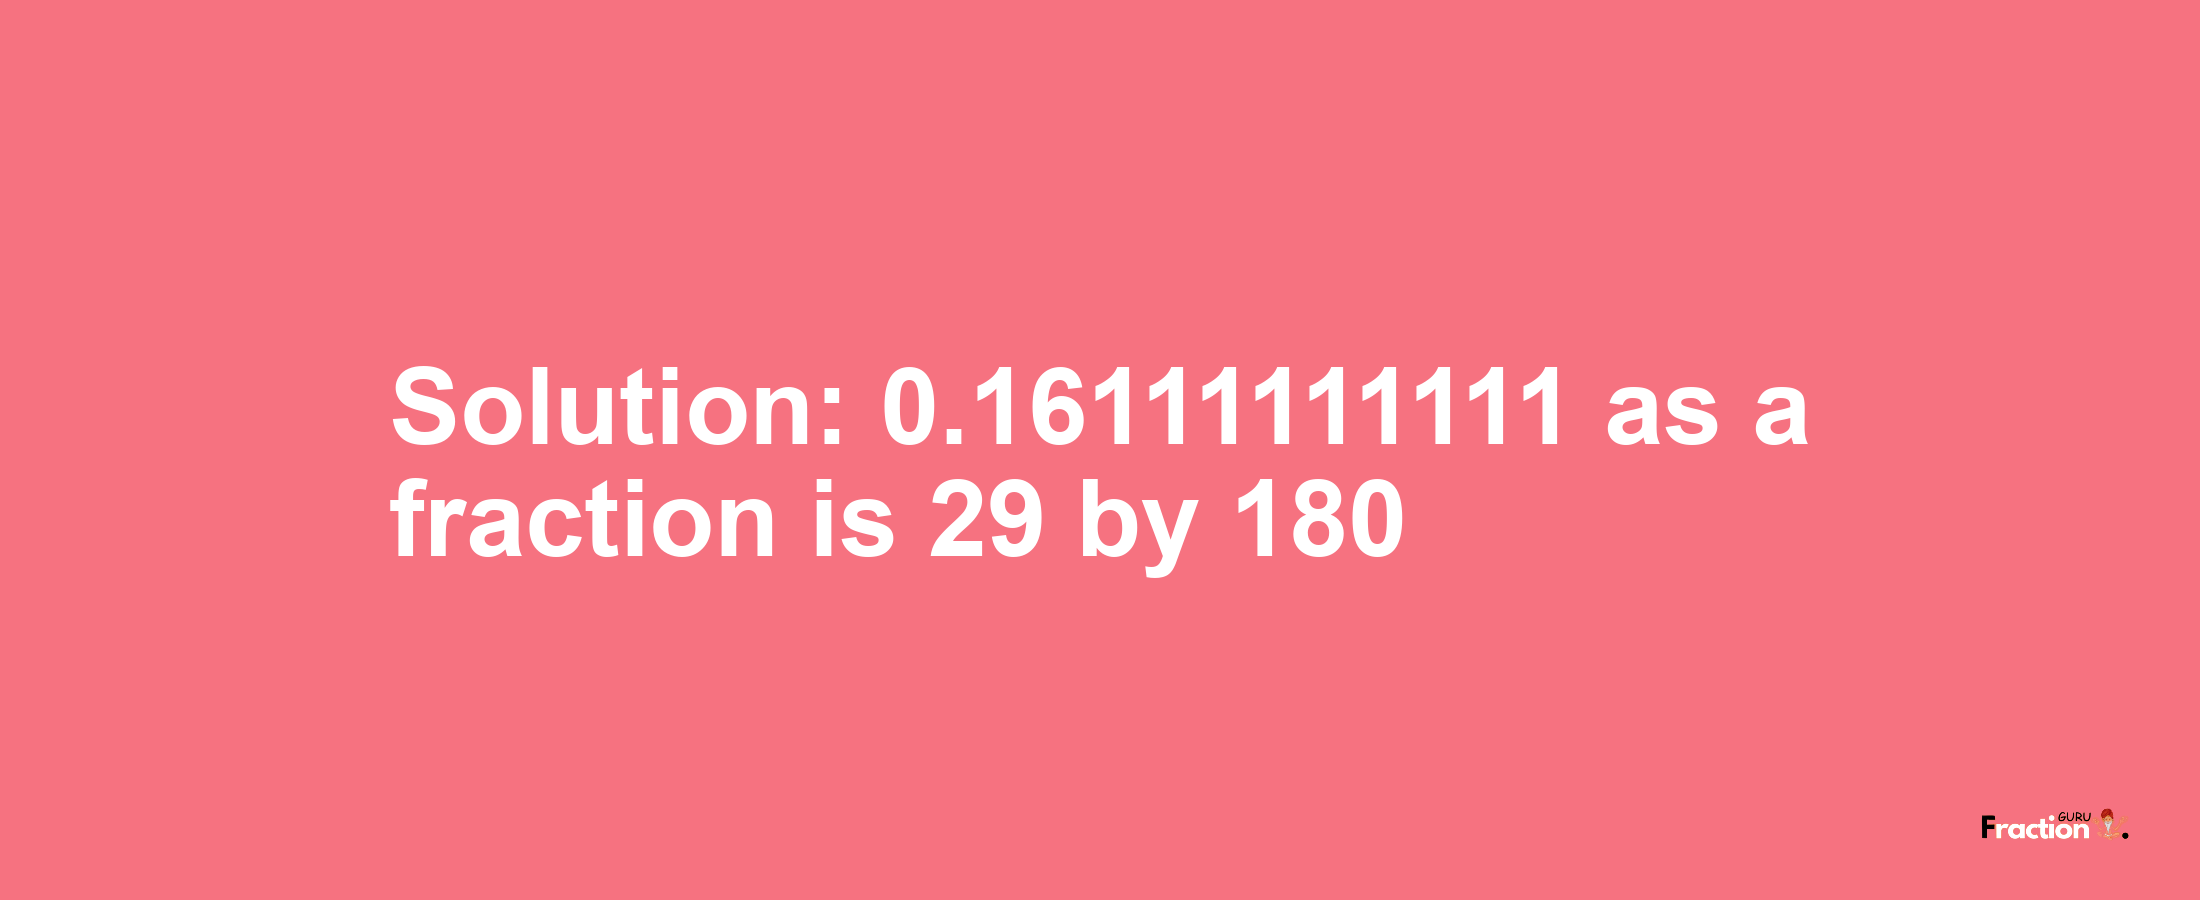 Solution:0.16111111111 as a fraction is 29/180